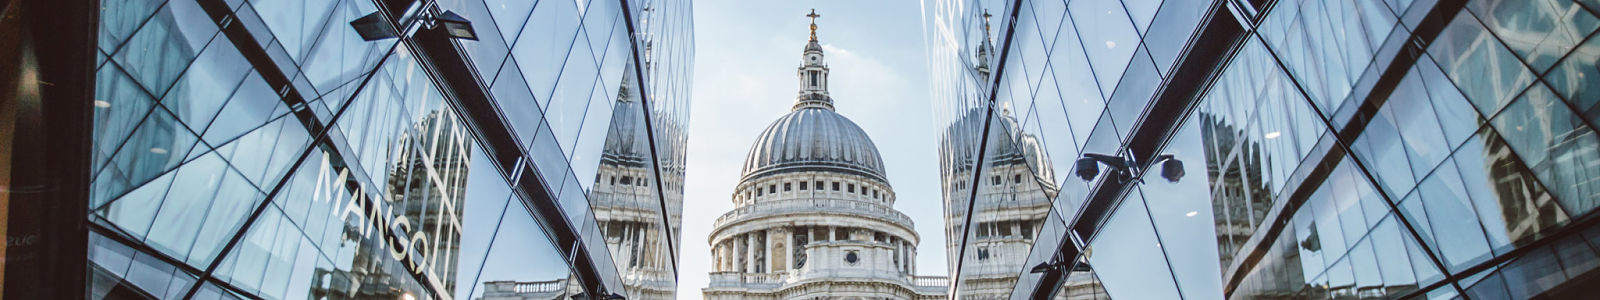 St Paul's cathedral's dome standing between two glass buildings